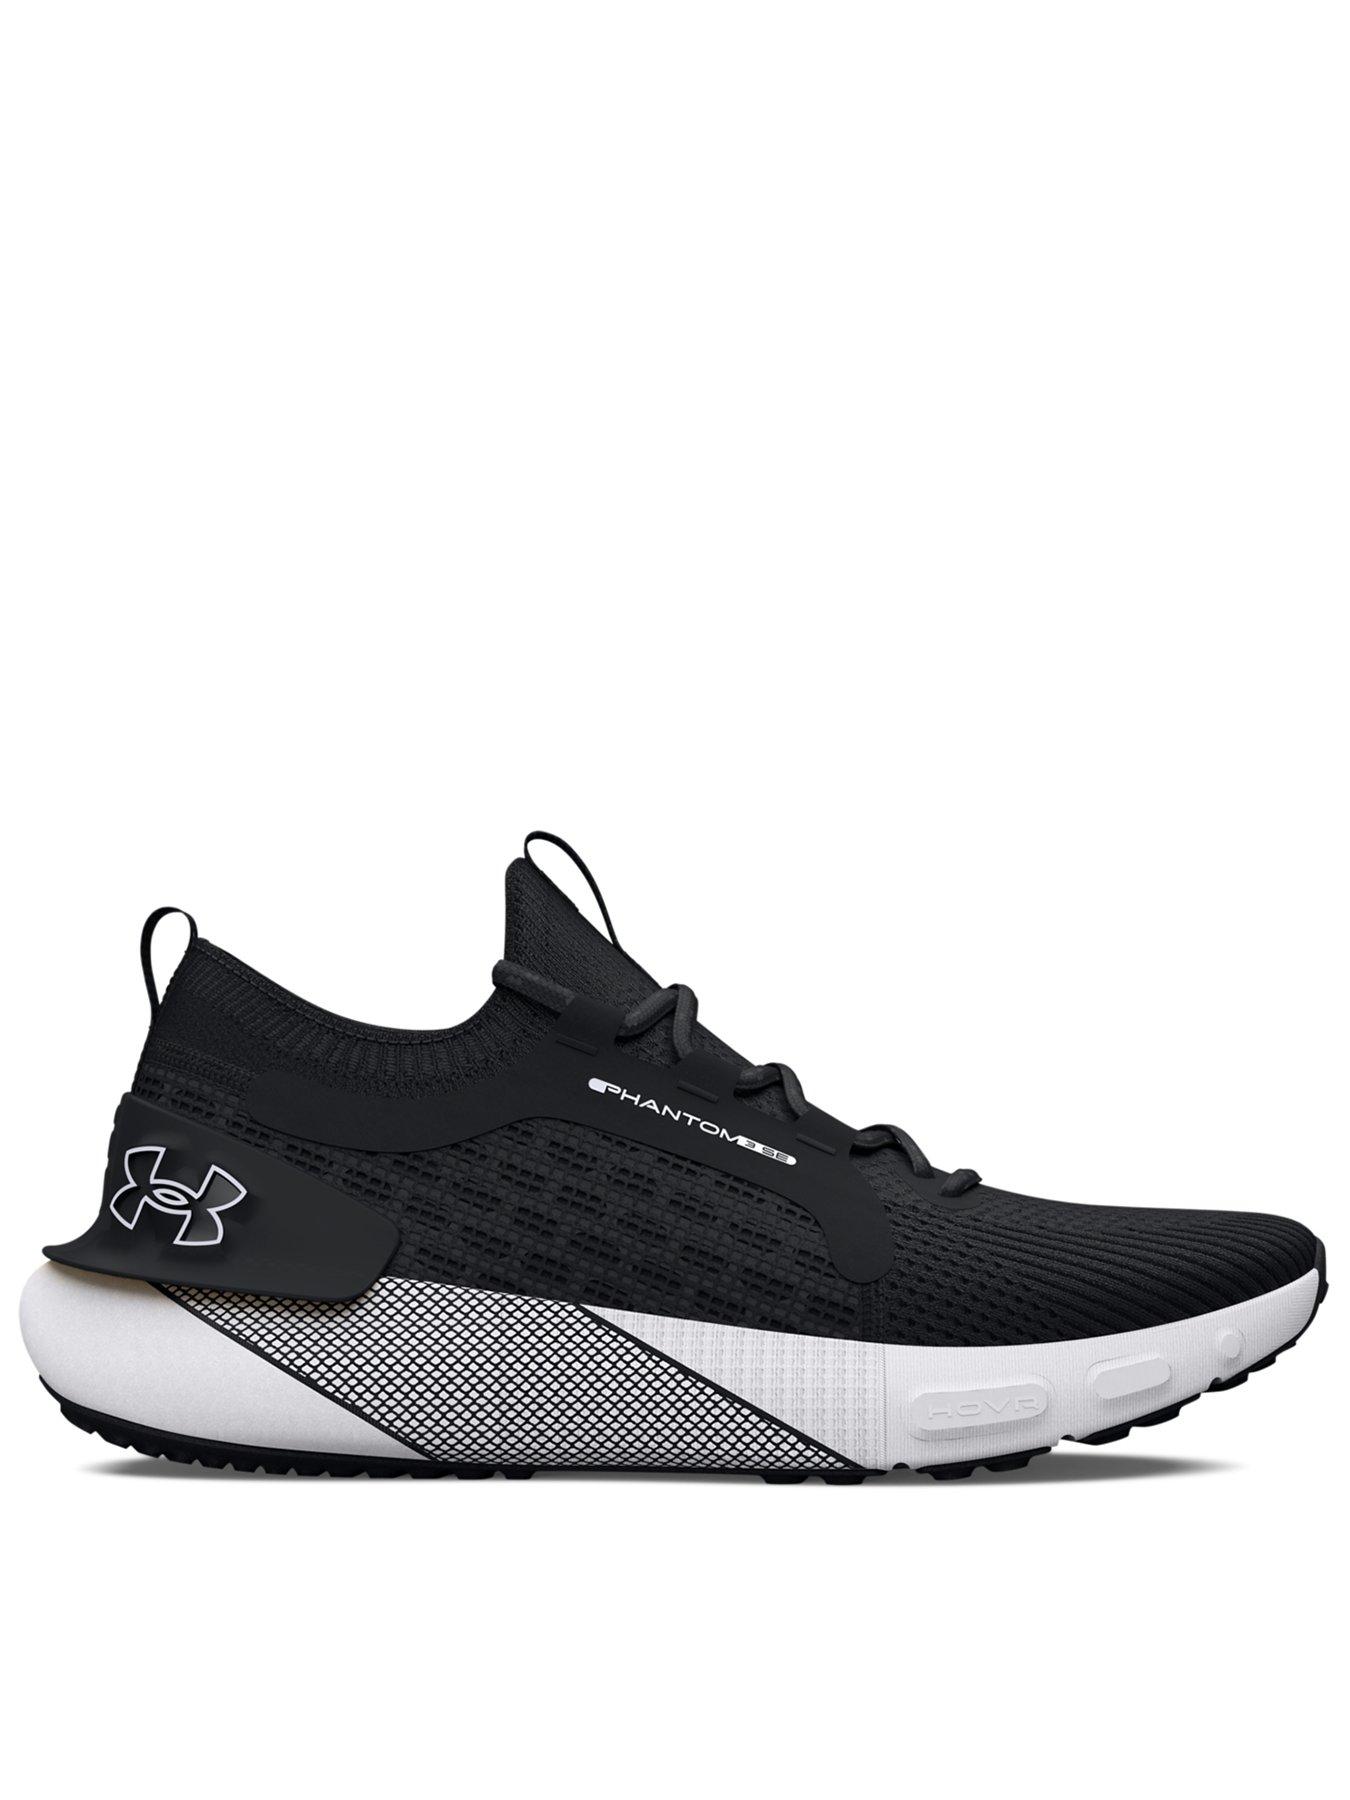 Under Armour Launches HOVR Phantom 2 Intelliknit - Runner's Tribe